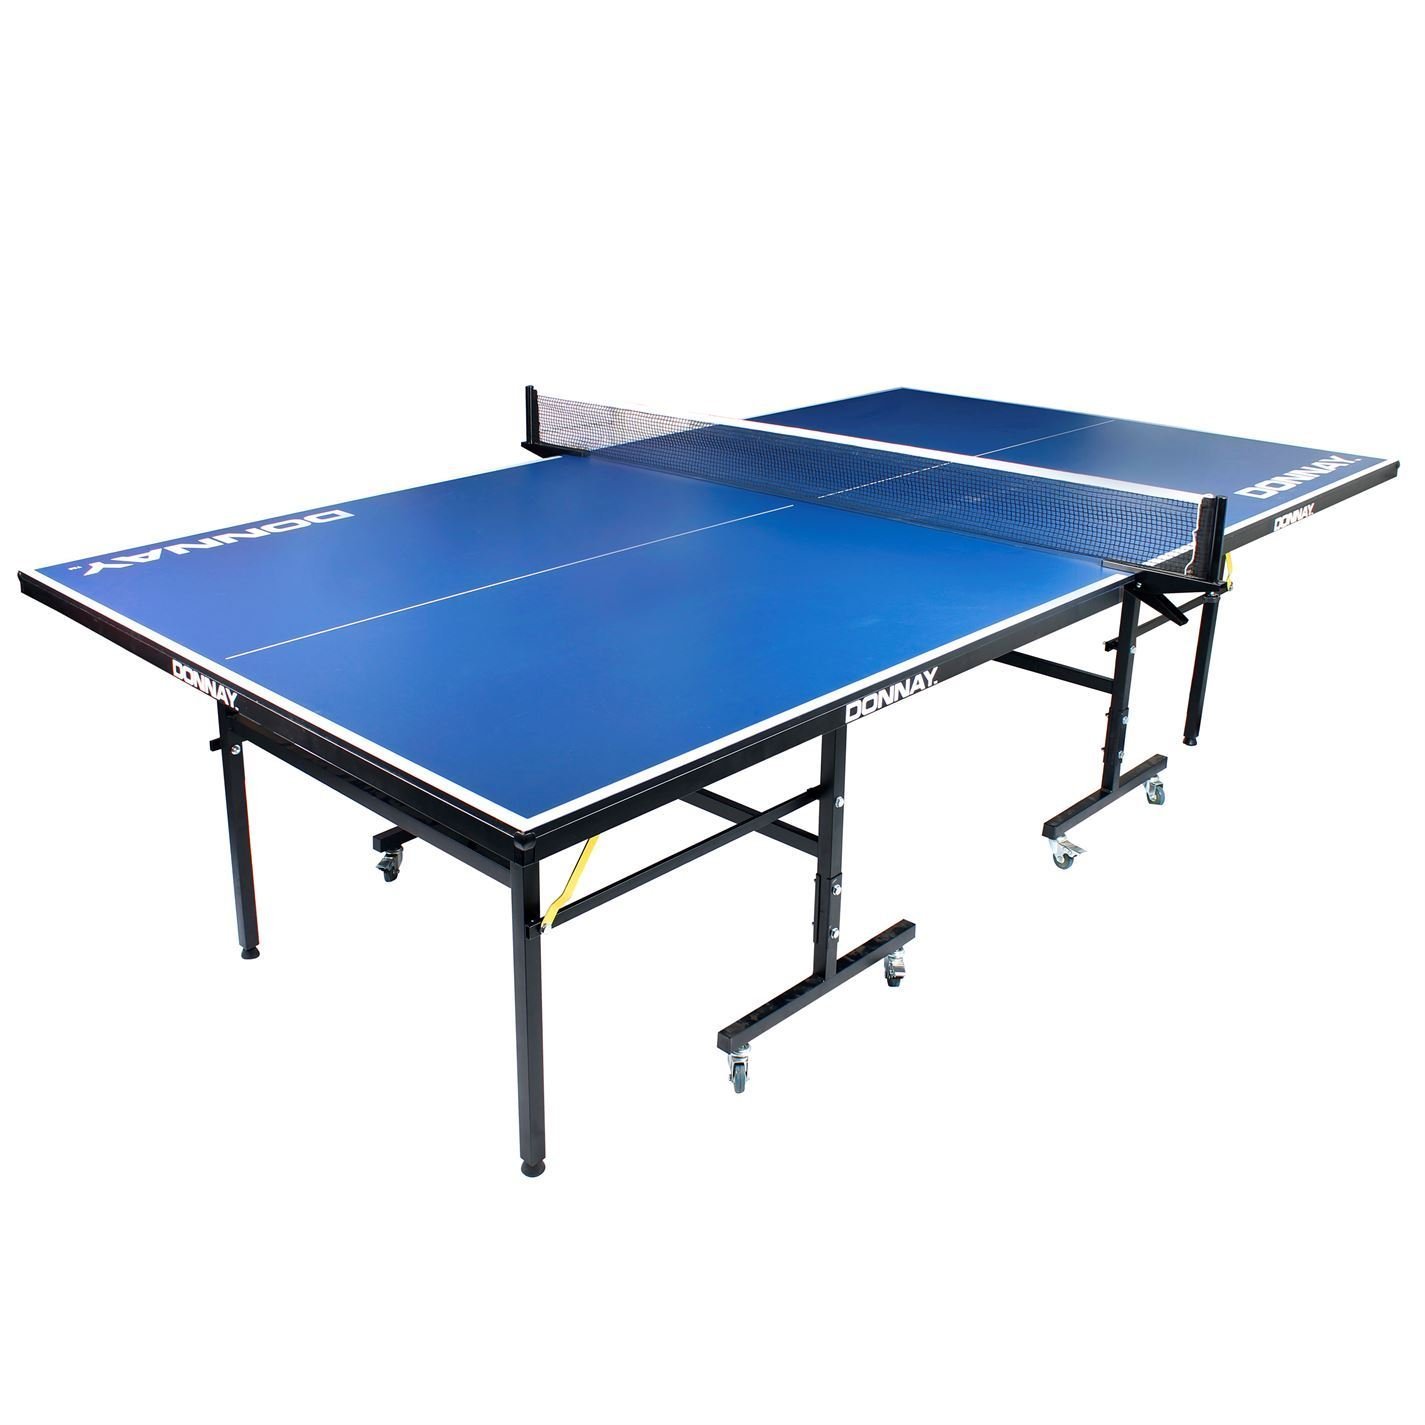 Donnay Indoor Outdoor Table Tennis Table Blue Full Size Folding Ping ...